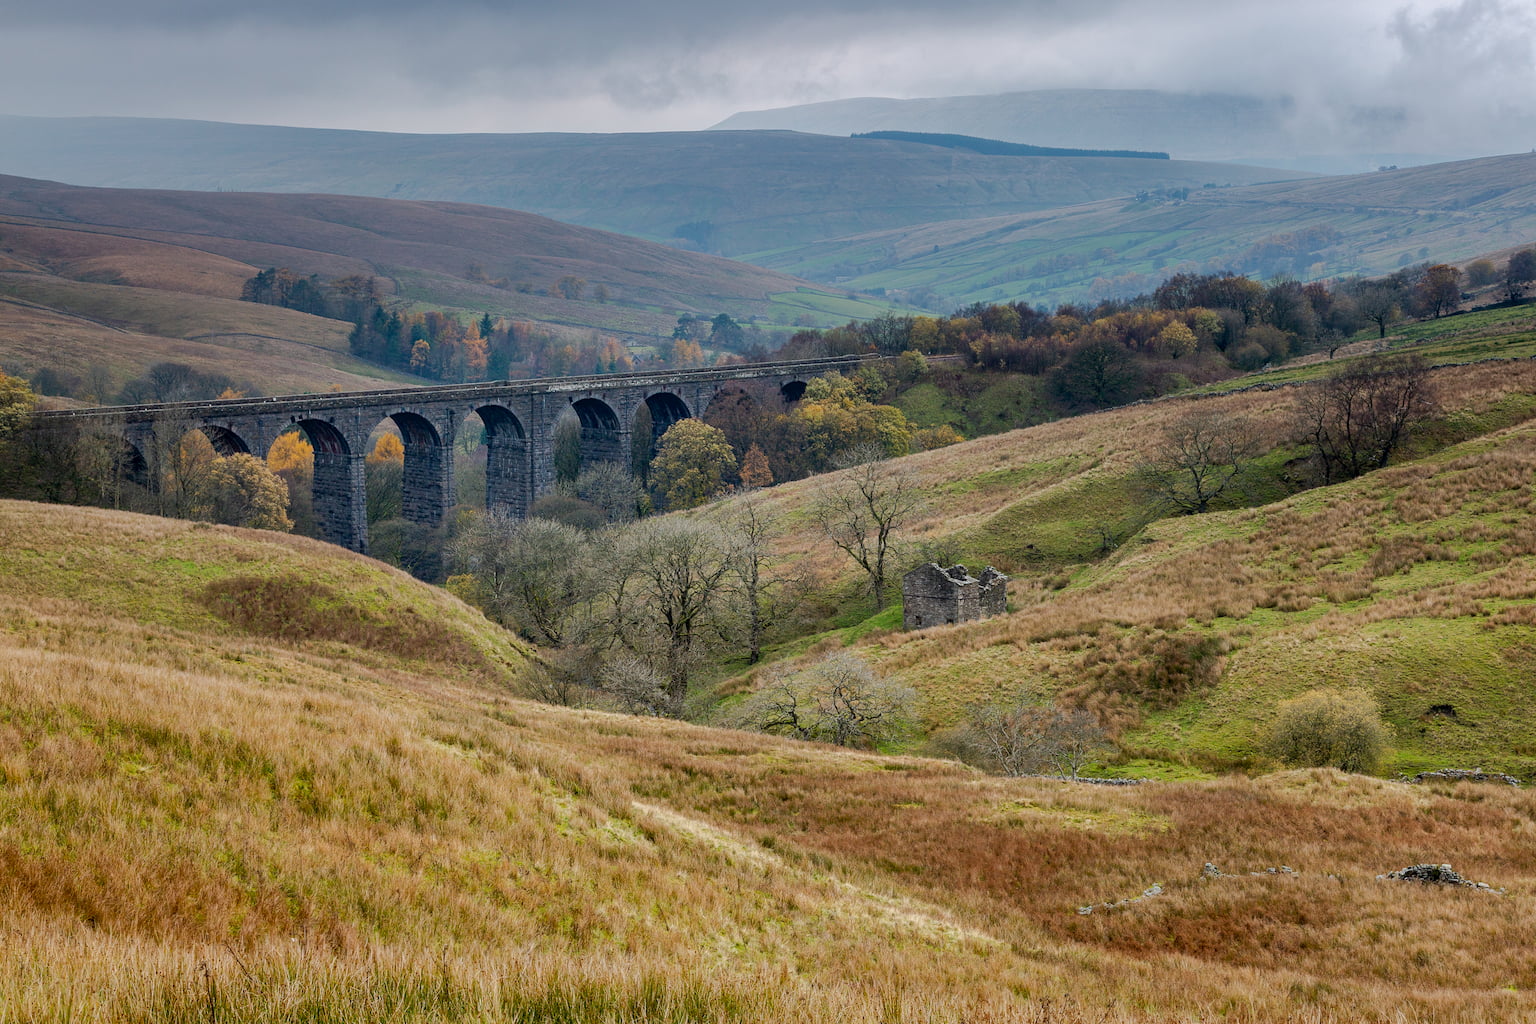 A landscape photograph of the Dent Head Viaduct on the Settle to Carlisle railway line in Dentdale, Cumbria with derelict stone barn in foreground.